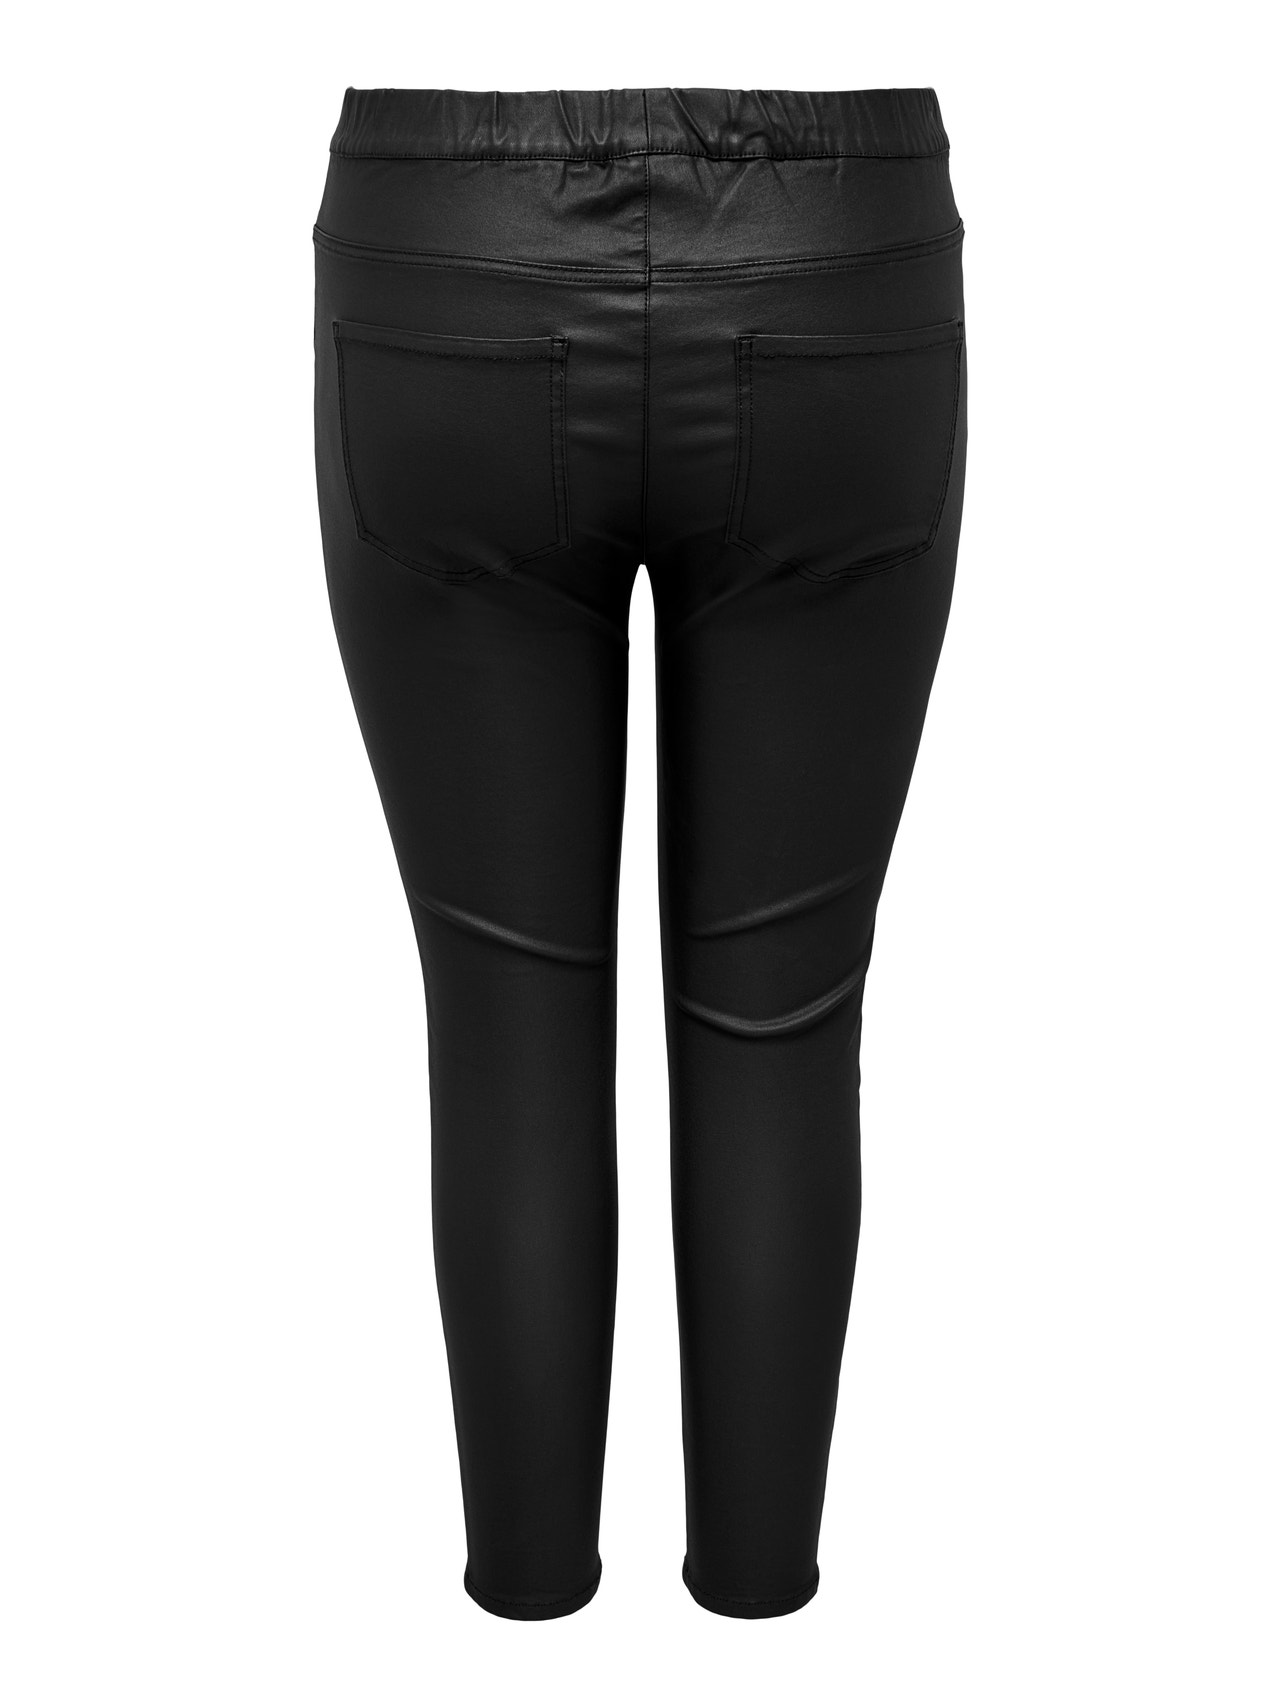 ONLY Curvy coated jeggings -Black - 15290962